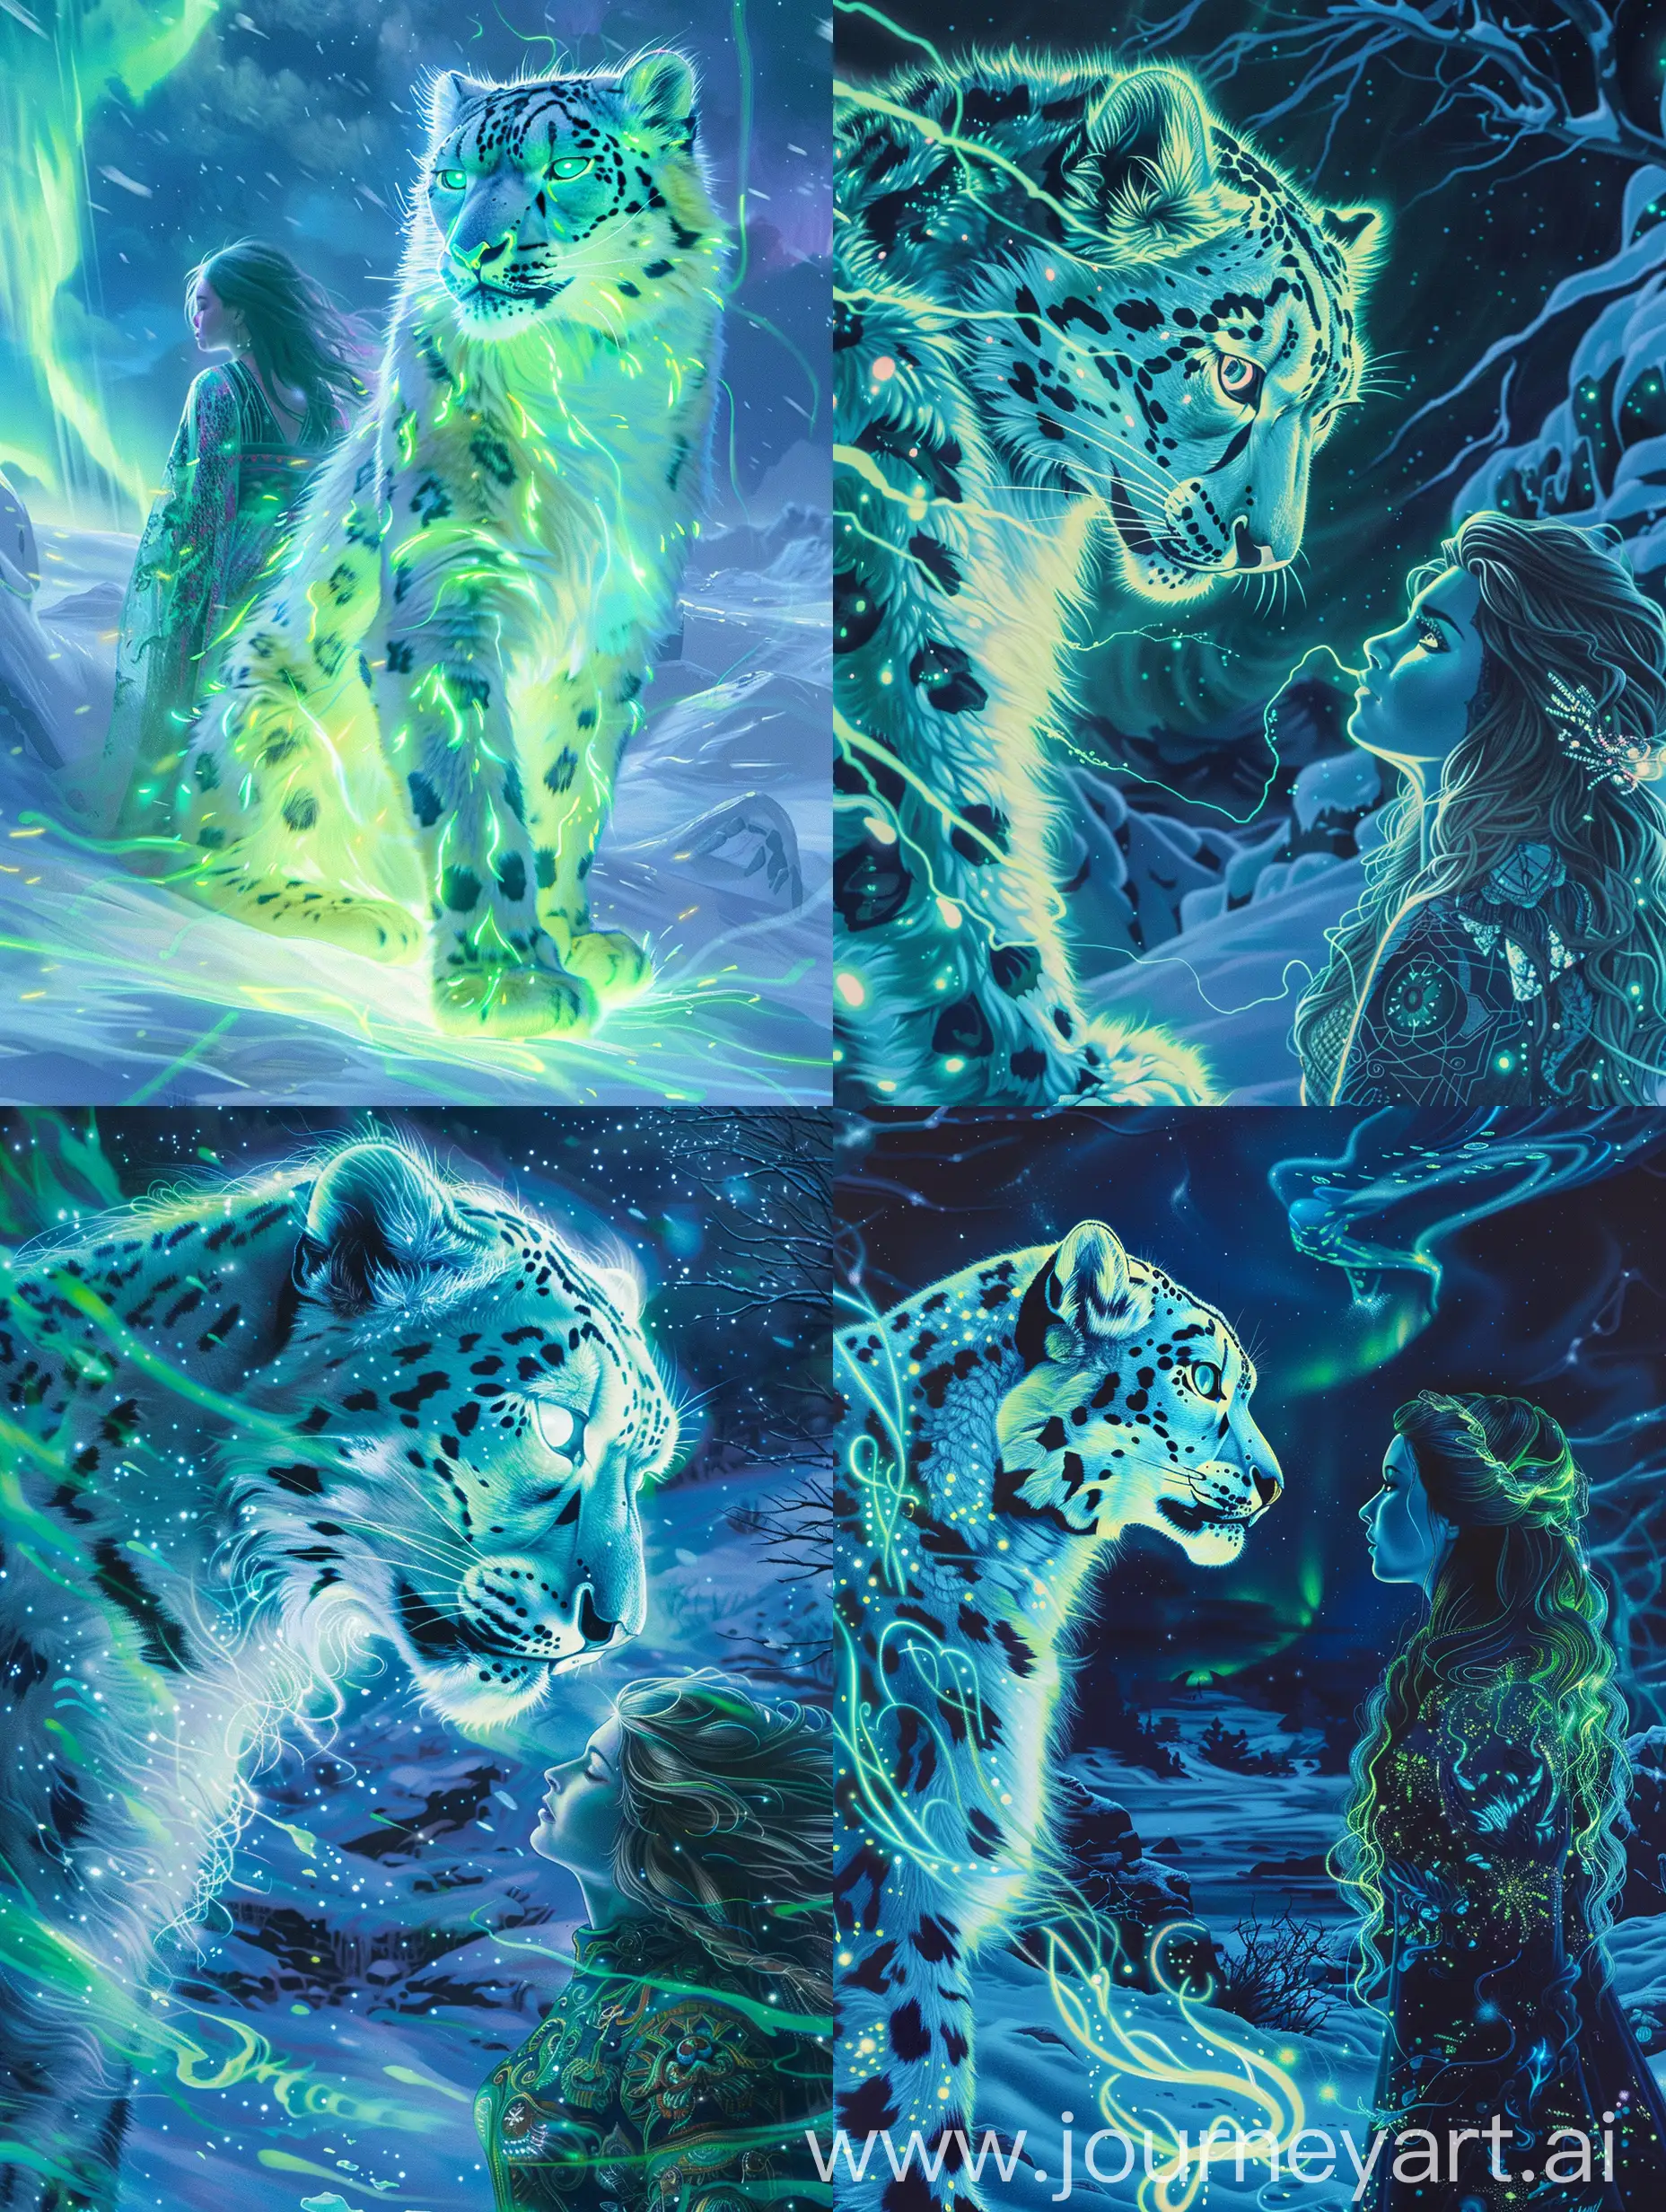 A mesmerizing, vibrant painting of a bioluminescent snow leopard and a woman illuminated by an ethereal, aurora borealis-inspired glow. Set against a stark winter landscape, the volumetric lighting casts an Art Nouveau-style ambiance. The snow leopard's glowing fur shines brightly, while the woman's hair and dress emit a soft, pulsating light. The overall effect is cinematic and captivating, with a dreamlike atmosphere and a touch of whimsy., cinematic, illustration, painting, vibrant